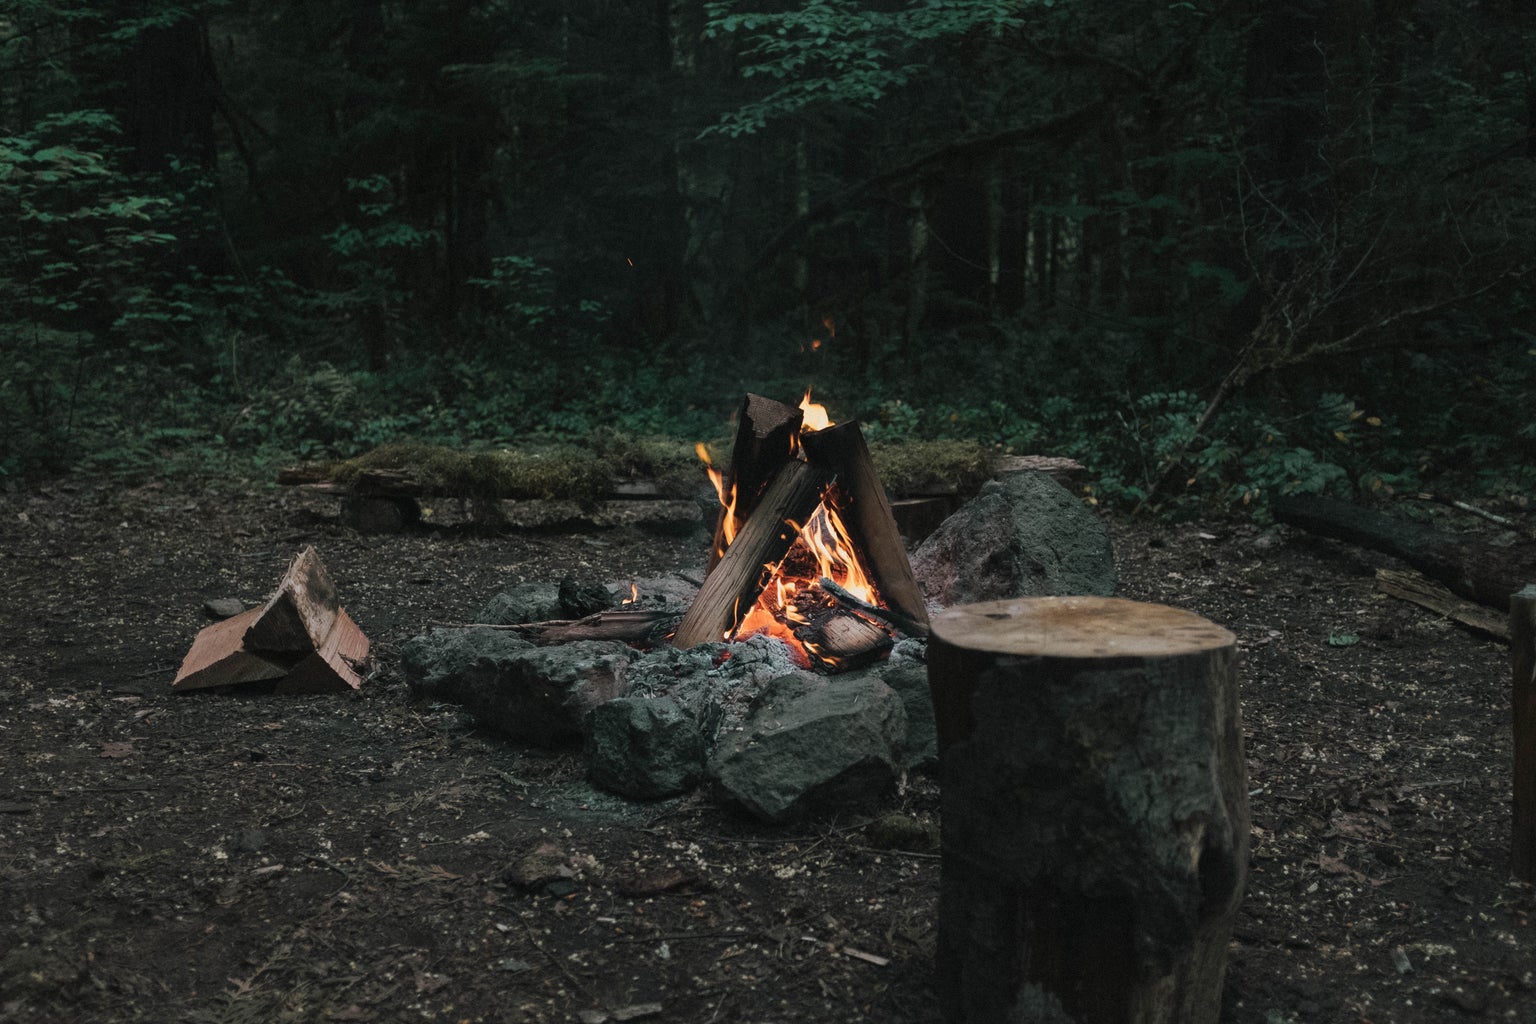 A bonfire in the middle of a mossy forest